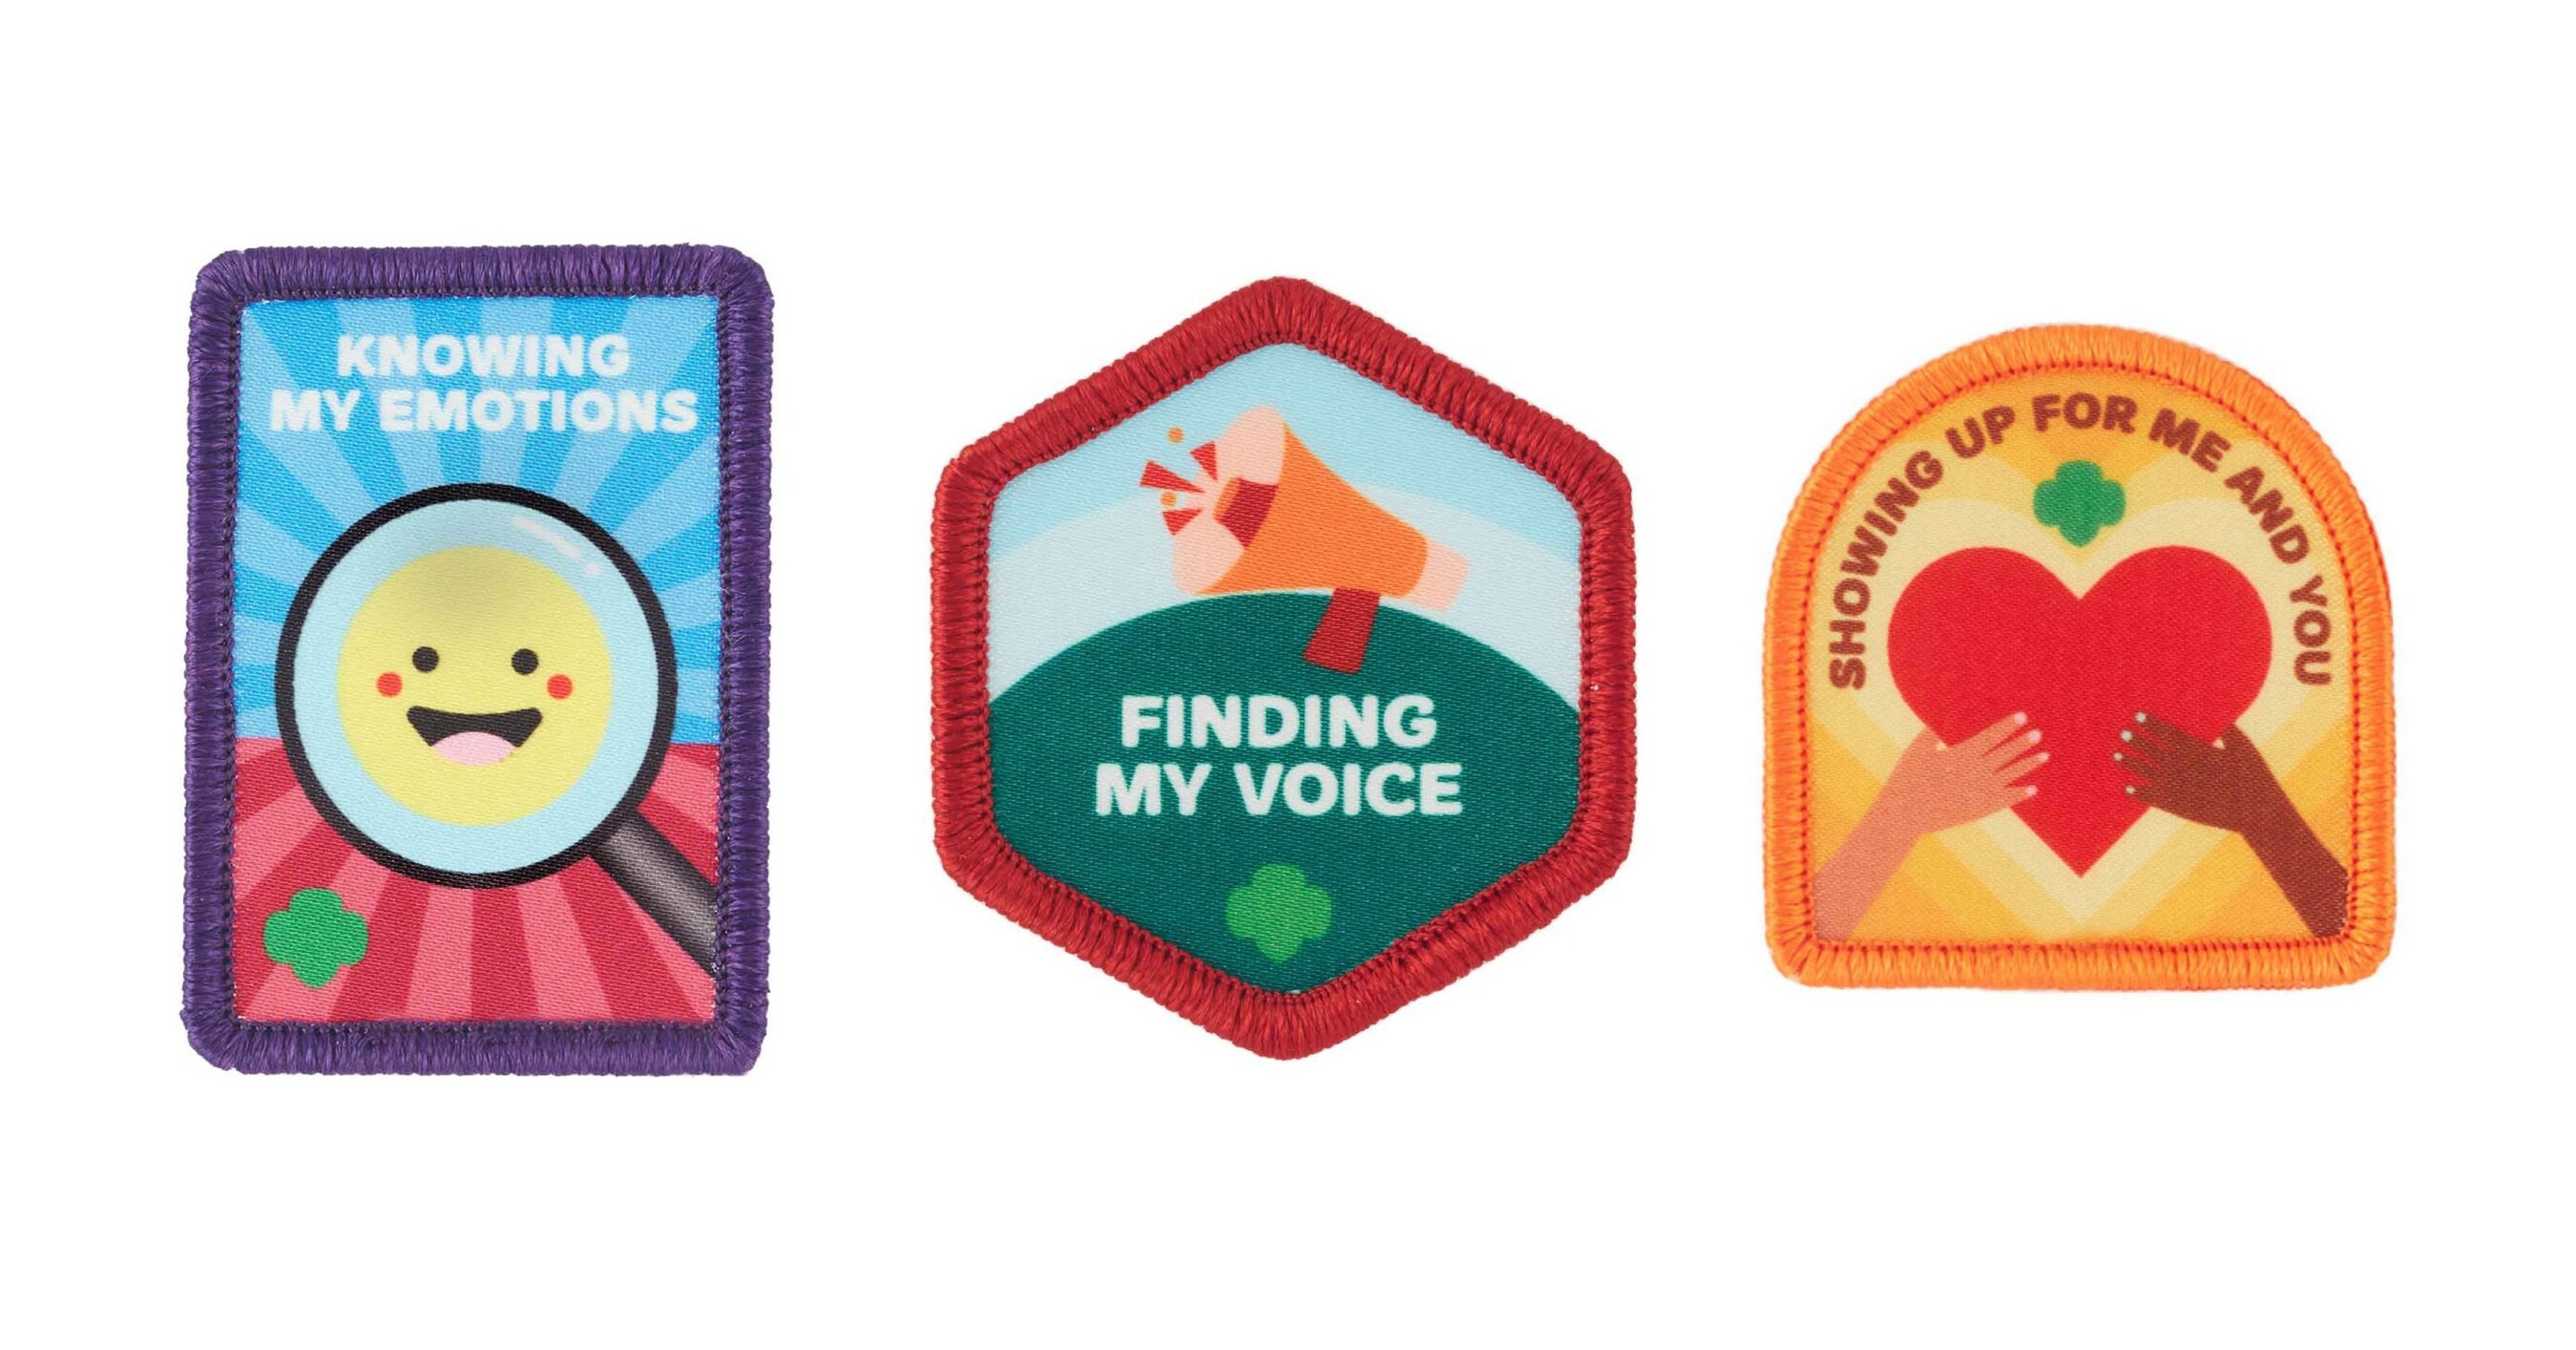 Girl Scouts prioritize mental wellness with new programming, patches